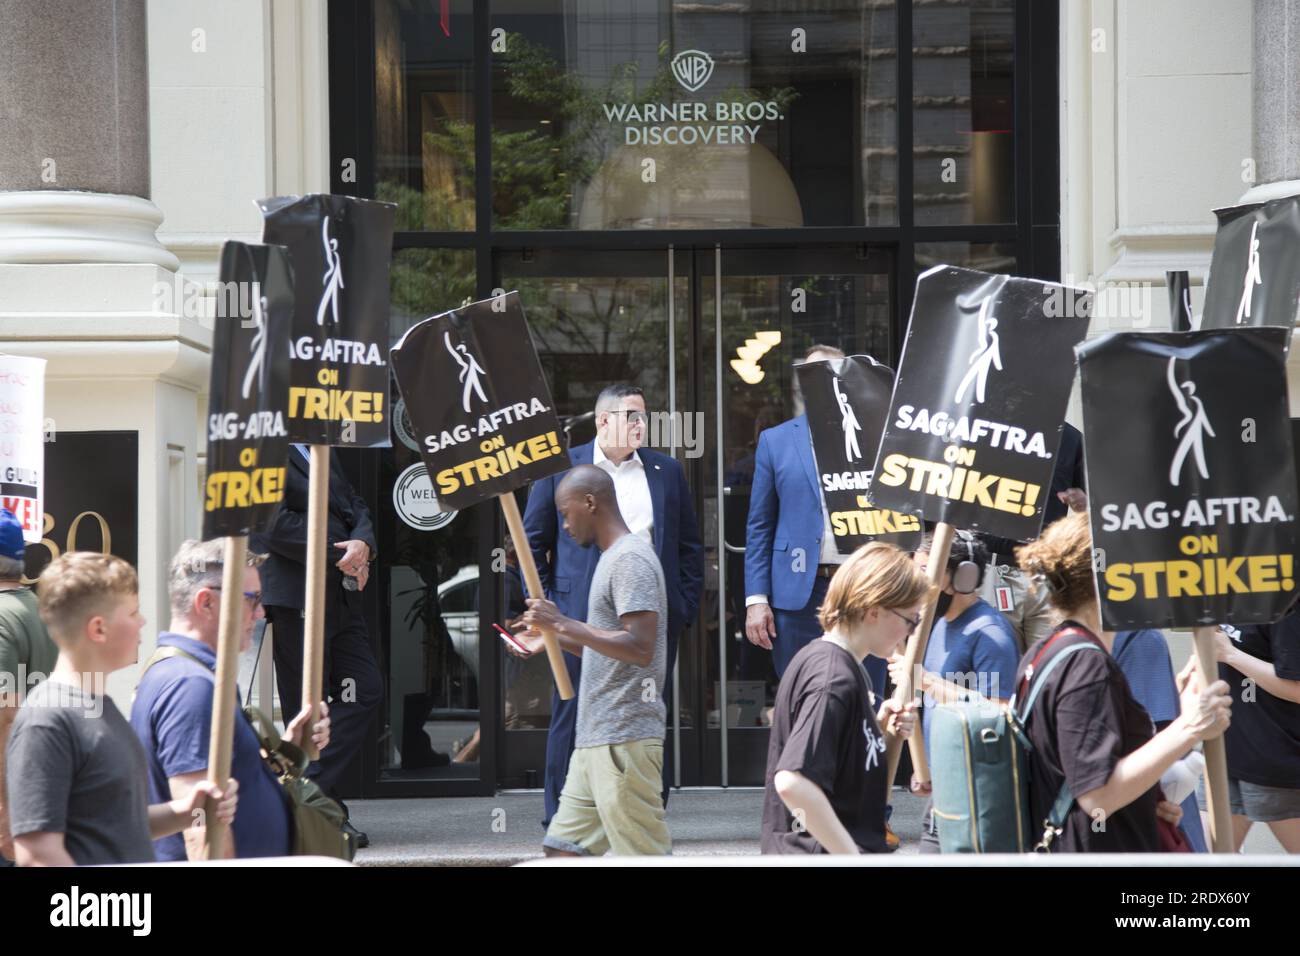 New York City: The strike continues among Writers Guild of America along with SAG-AFTRA  Union members with picket lines in multiple locations in in Manhattan crippling the entertainment industry. Union members picket in front of Warner Brothers building in Manhattan. Stock Photo